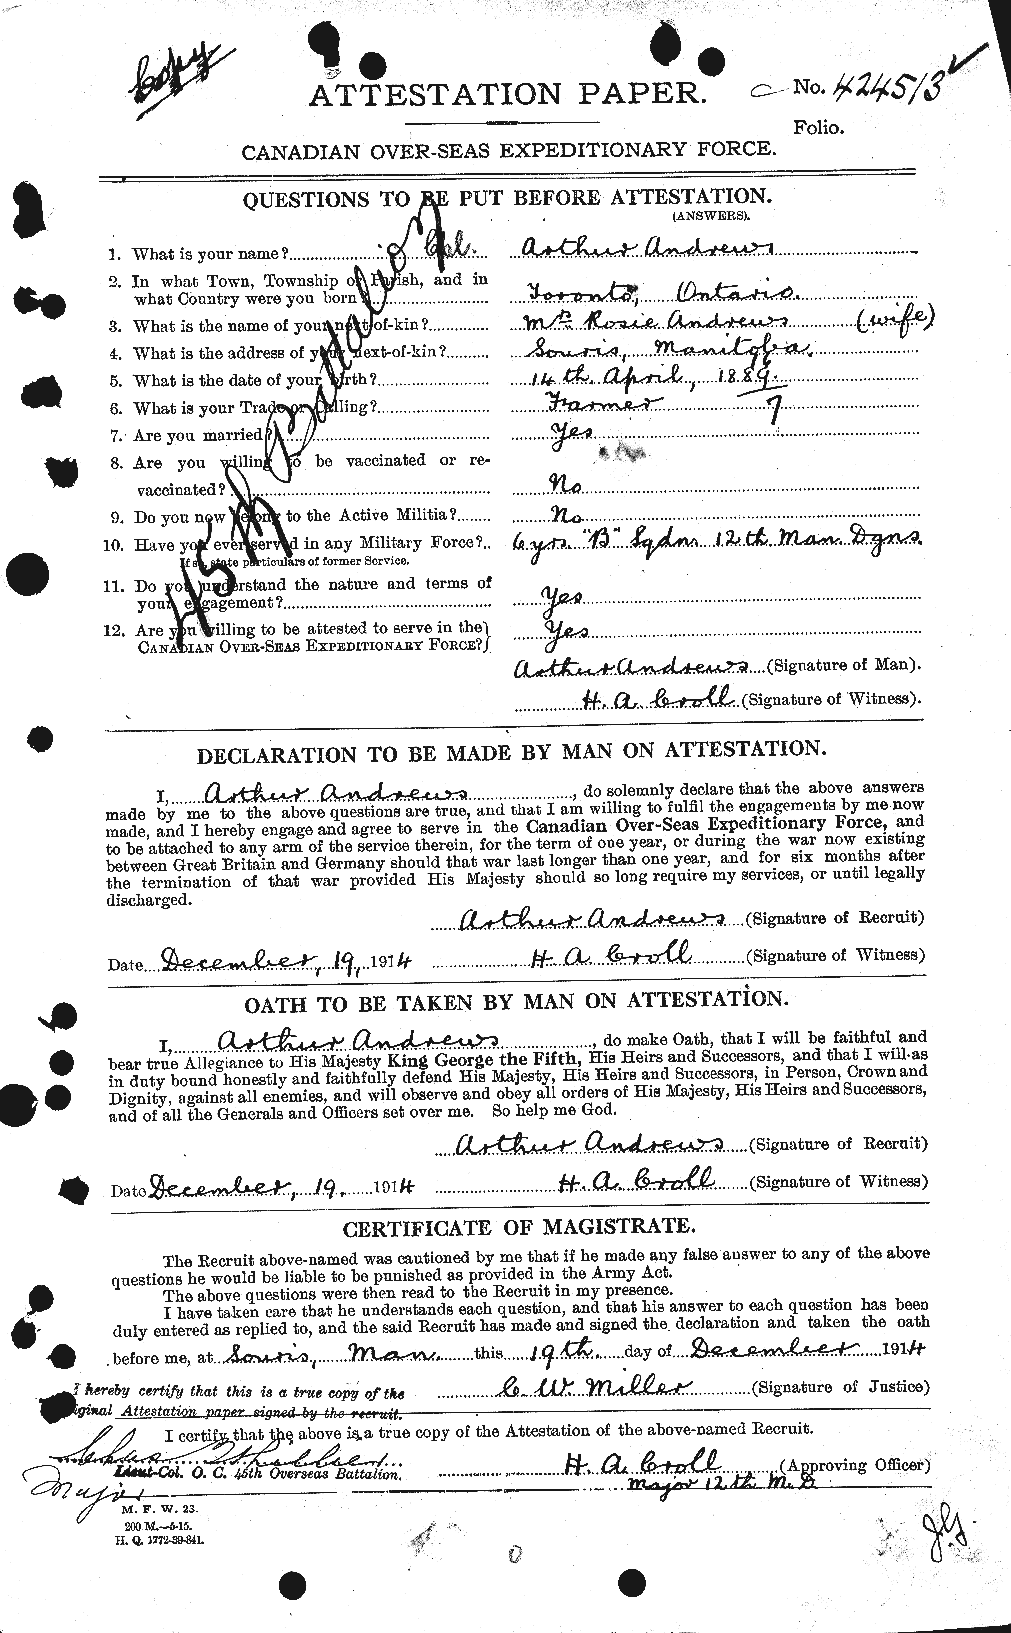 Personnel Records of the First World War - CEF 210436a